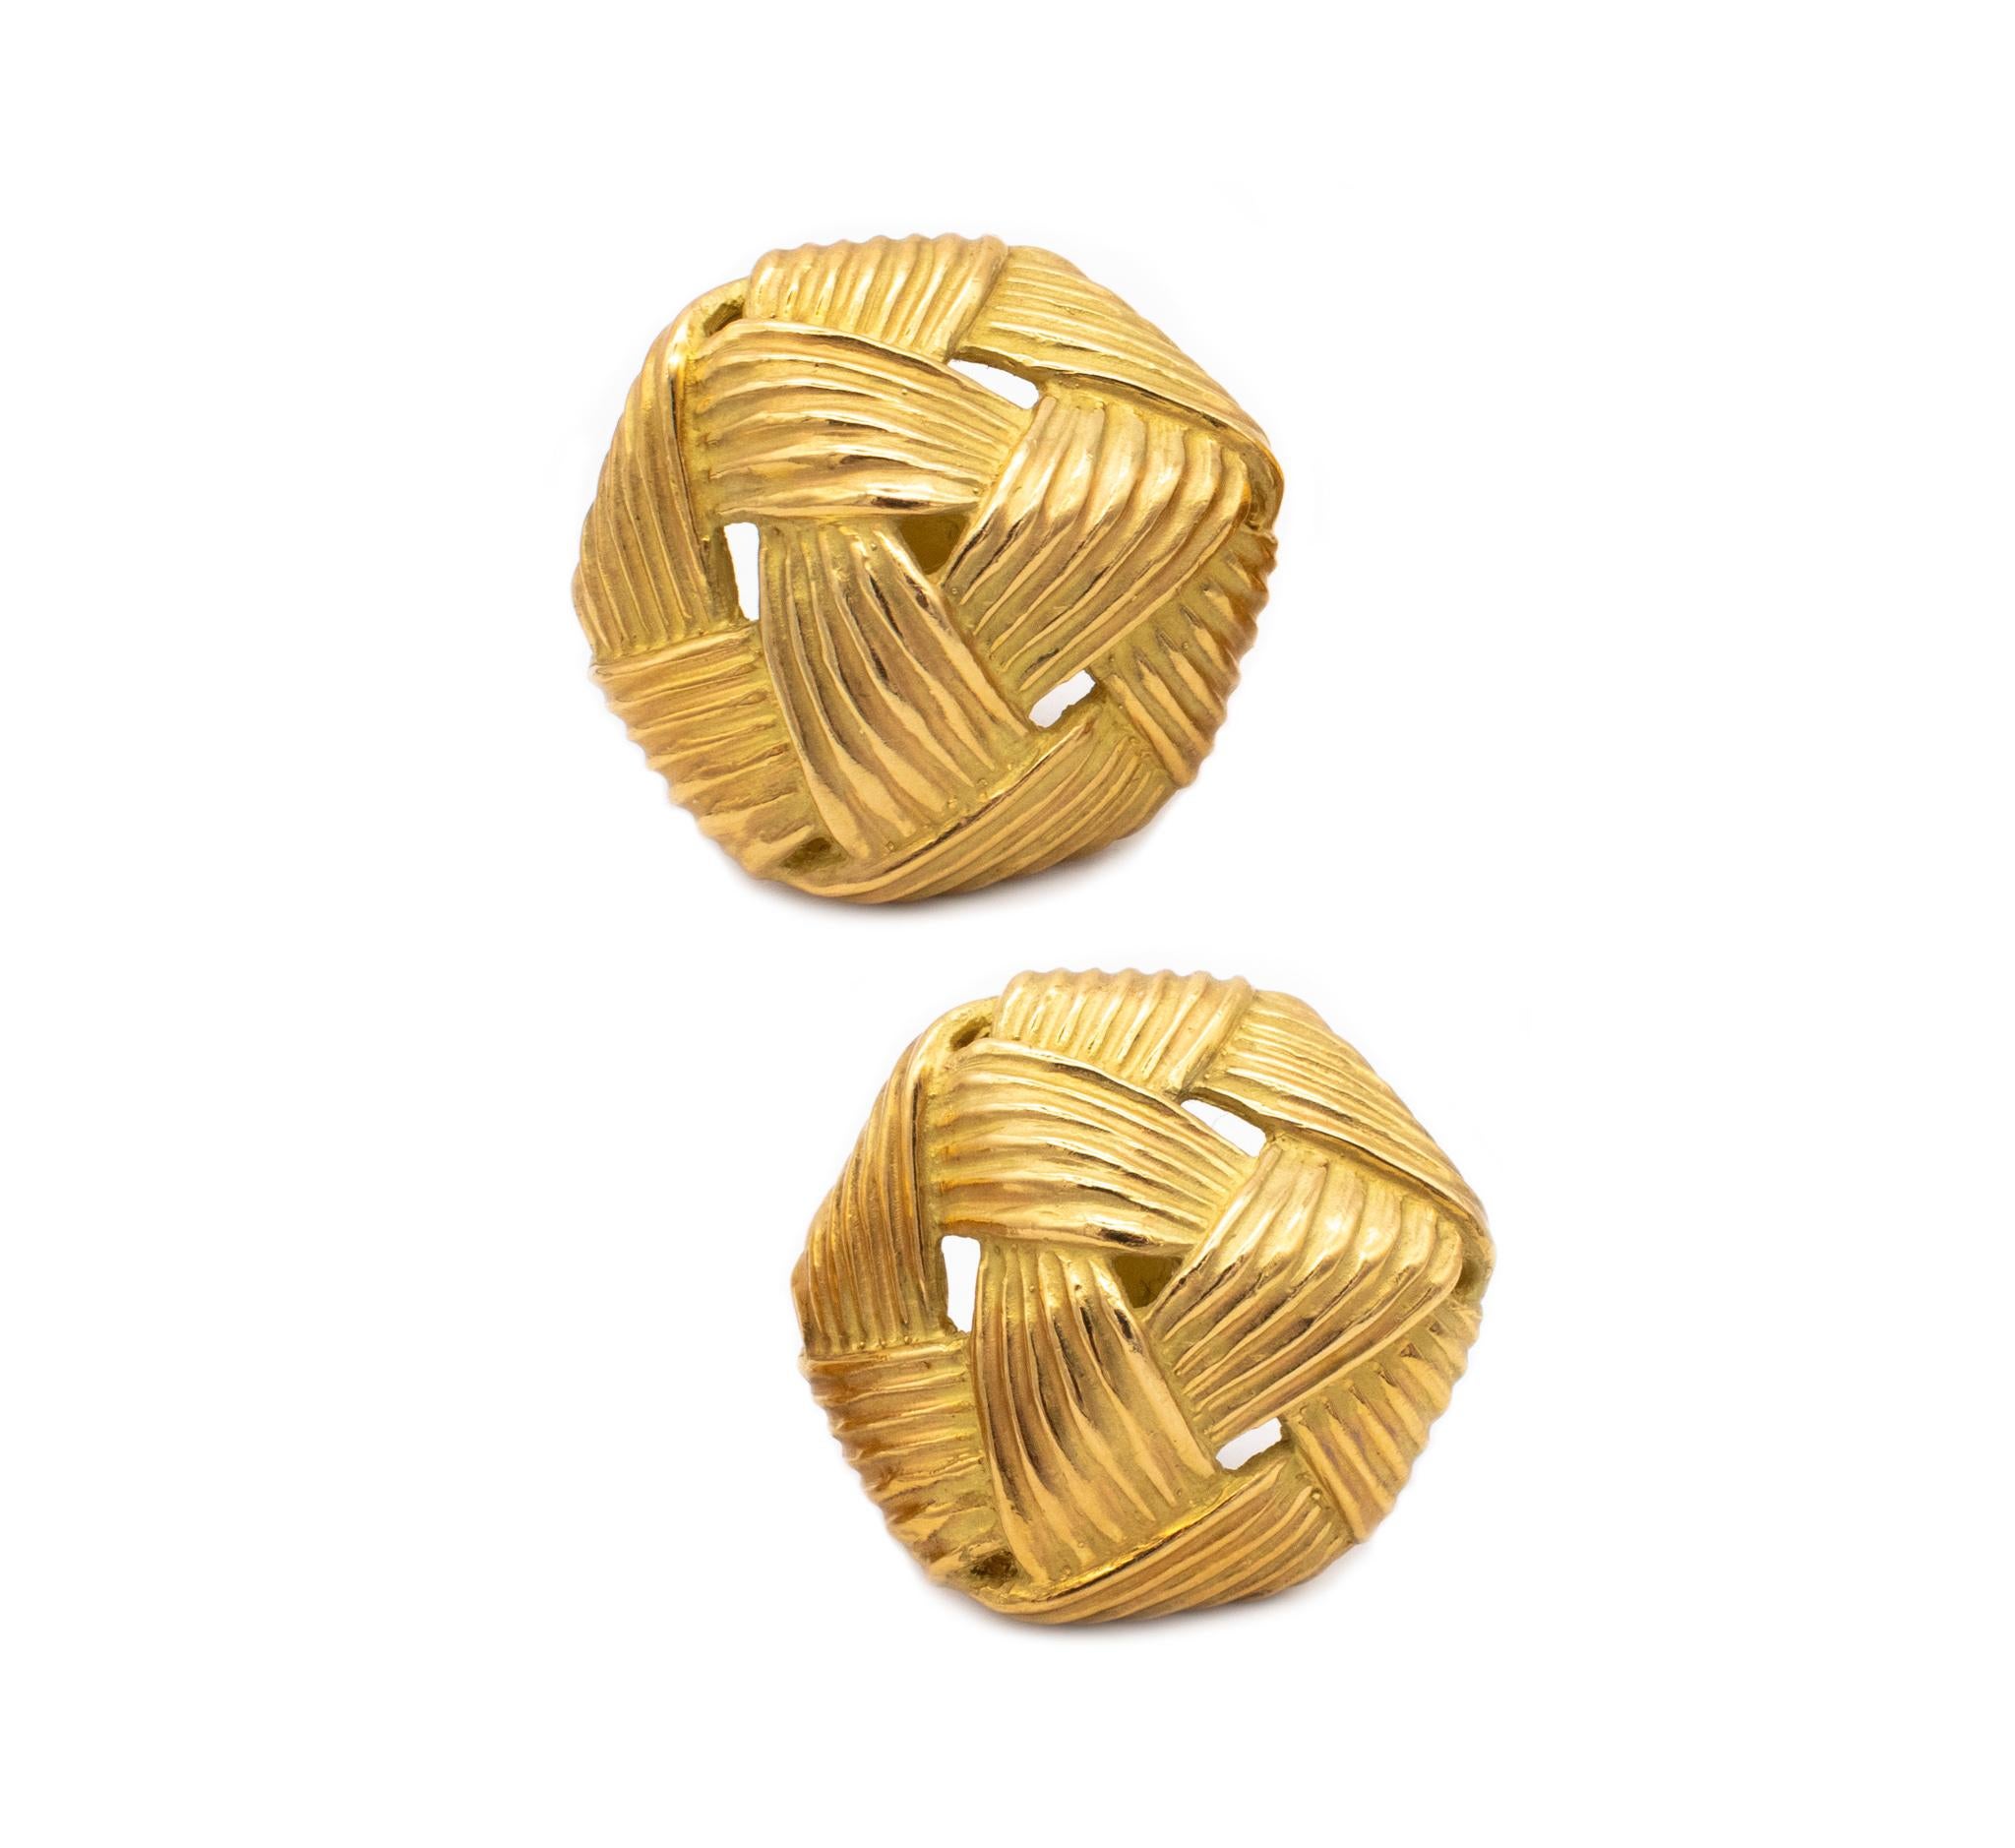 Rare pair of earrings designed by Angela Cummings.

An elegant pair of textured earrings, created back in the 1984 at the Cummings studio in New York city. This vintage rare pieces are made as a mirrored pair and was crafted in solid yellow gold of